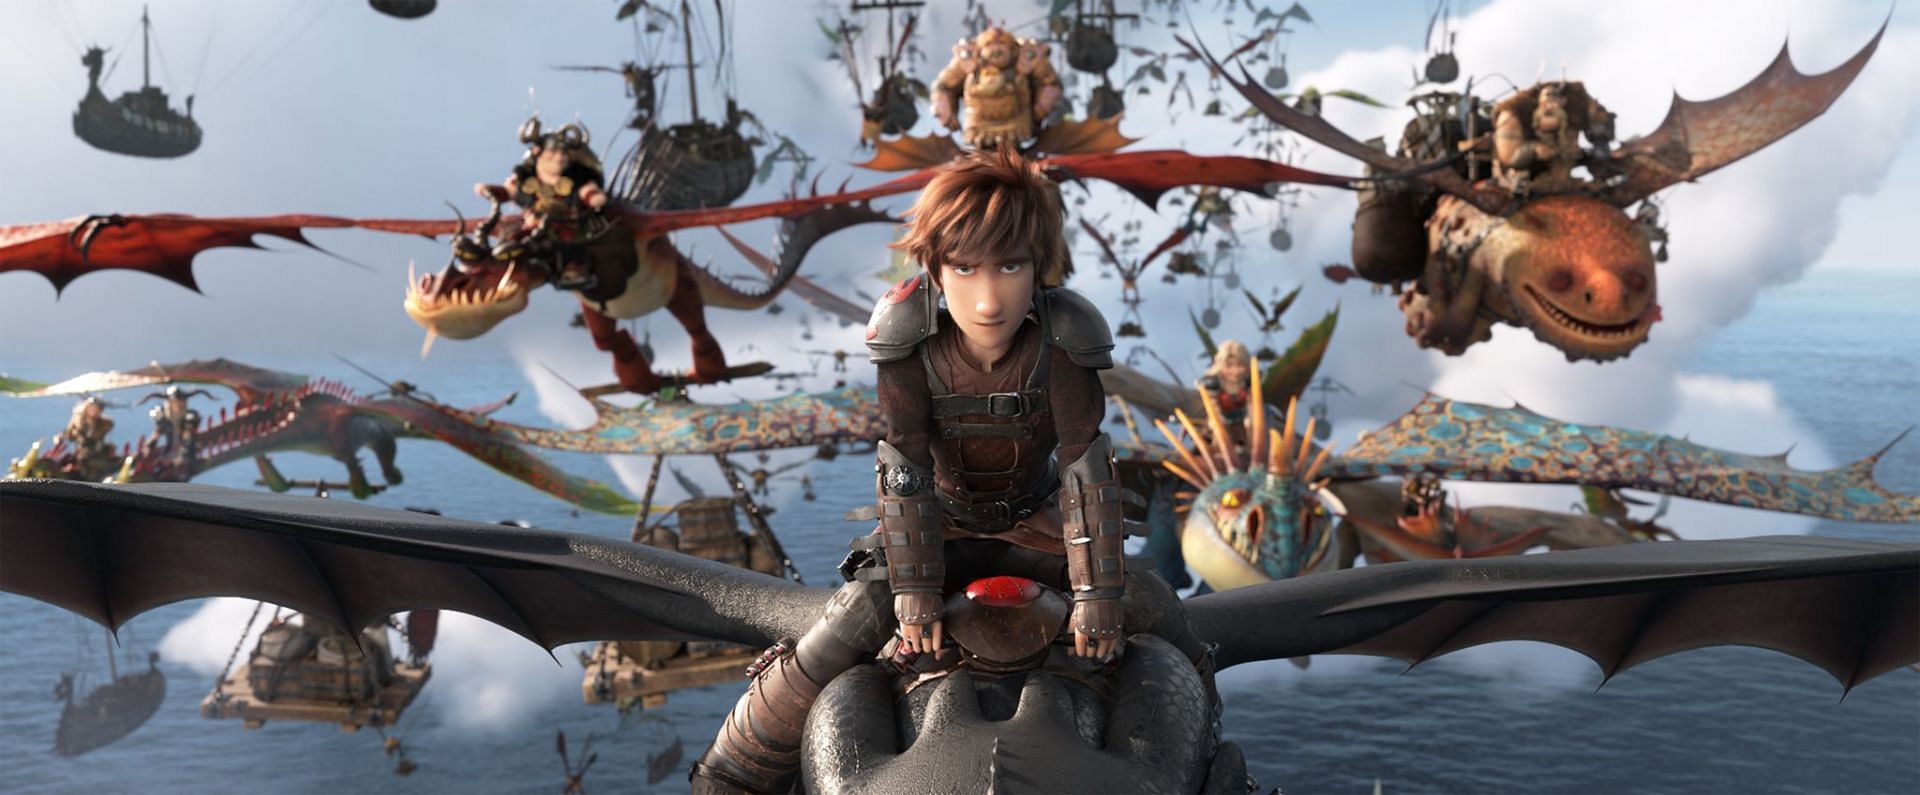 Get ready to soar with Toothless and Hiccup once again in the live-action adaptation of How to Train Your Dragon, set to release in 2025 (Image via Dreamworks)